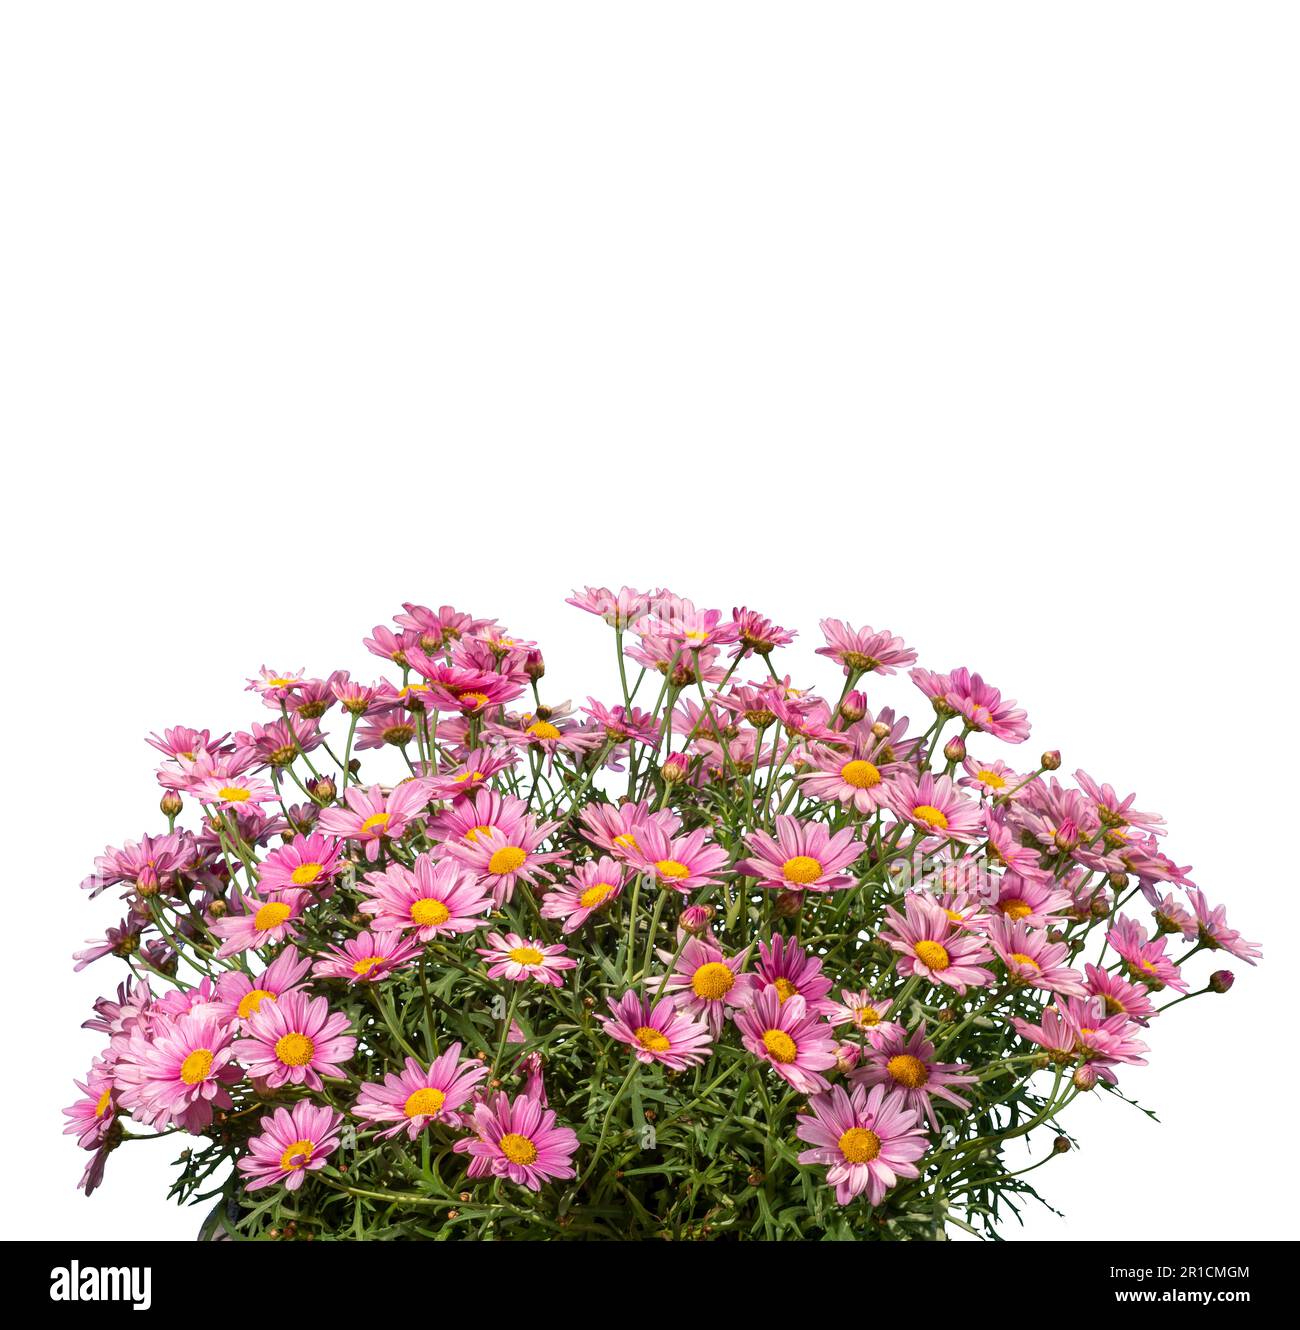 Bunch of daisies with pink petals isolated on white with clipping path included, copy space for greeting card Stock Photo